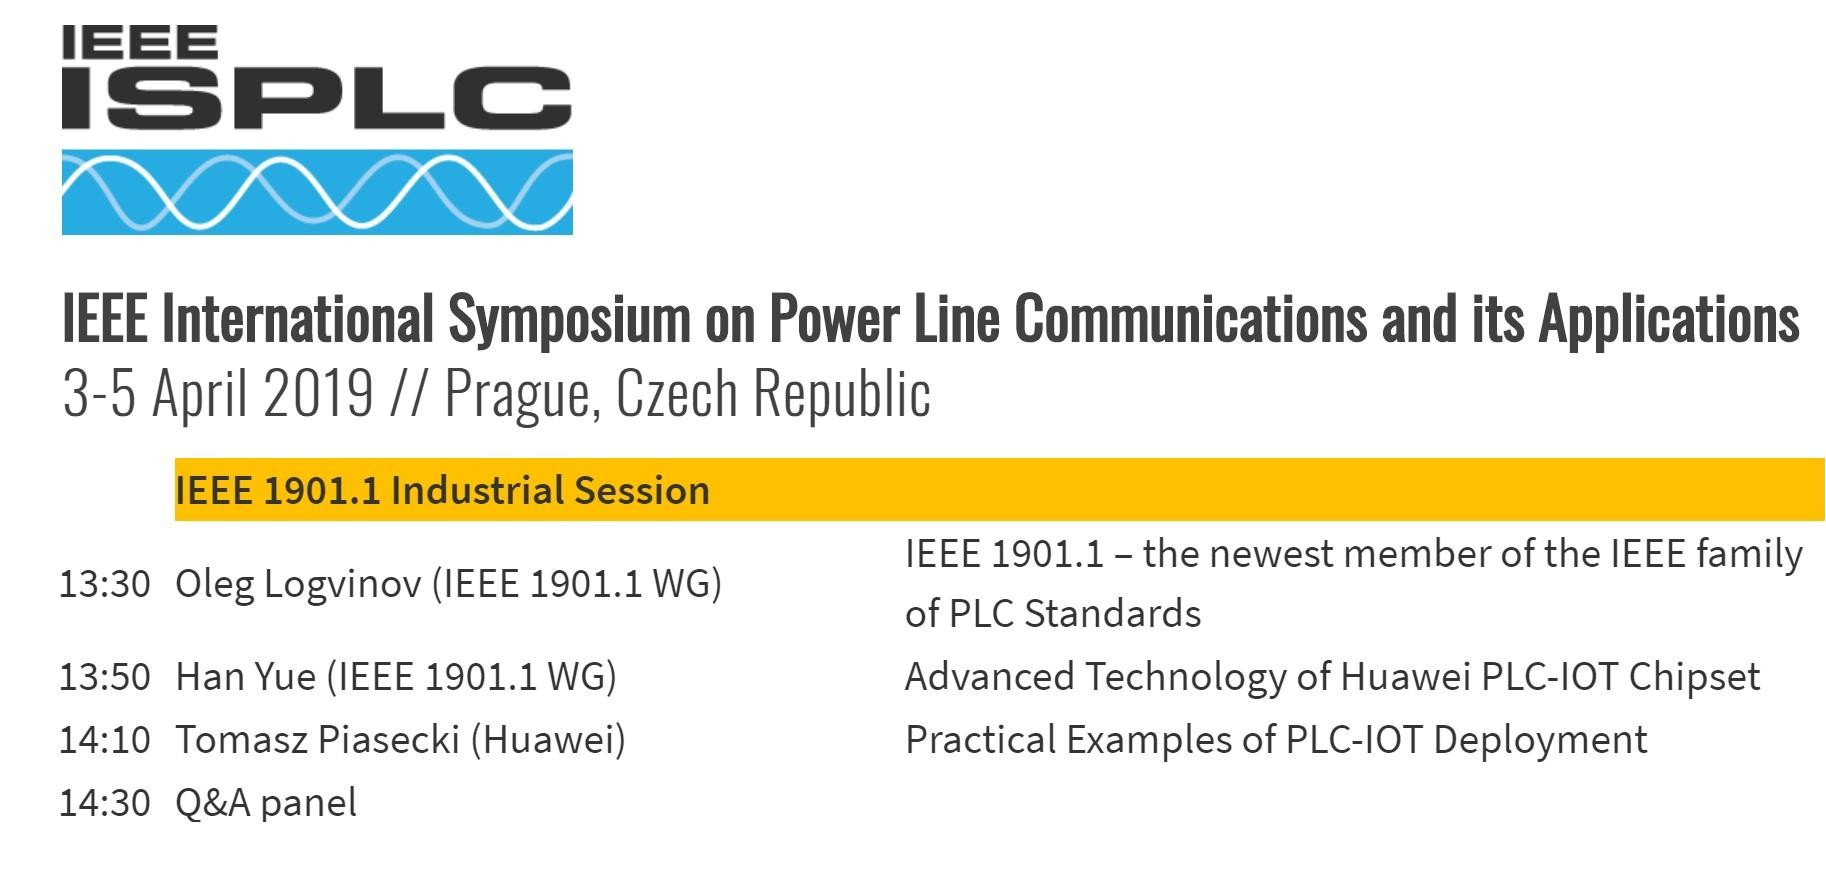 OLEG LOGVINOV: I LOOK FORWARD TO LEADING THE IEEE 1901.1 SESSION AT THE ISPLC 2019 IN PRAGUE!